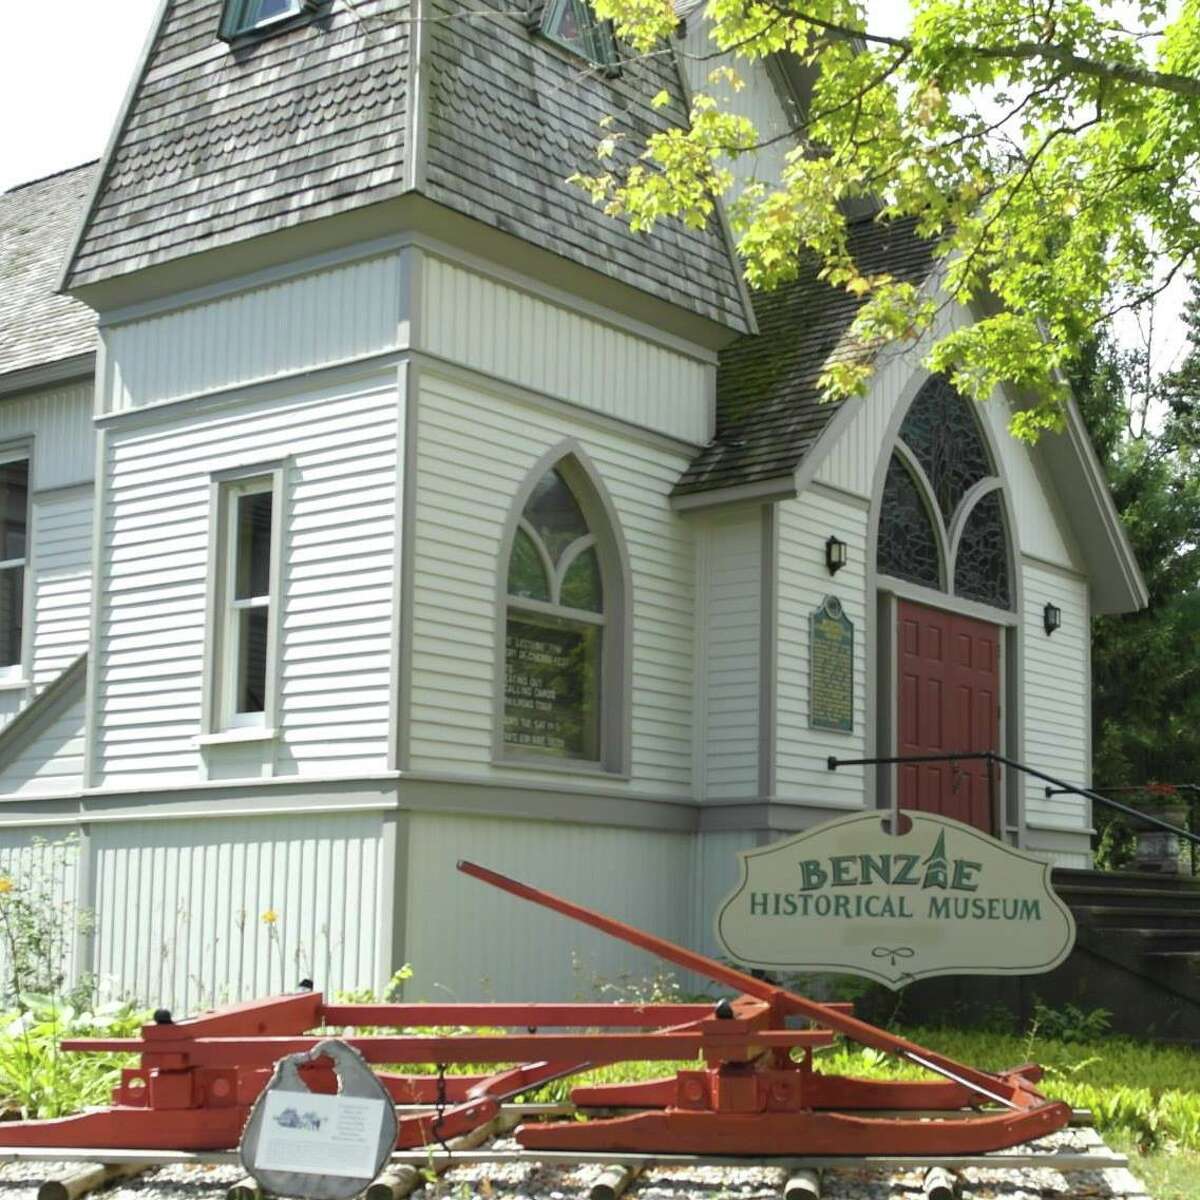 The Benzie Historical Museum in Benzonia is housed in the original Benzonia Congregational Church, which opened in 1886.